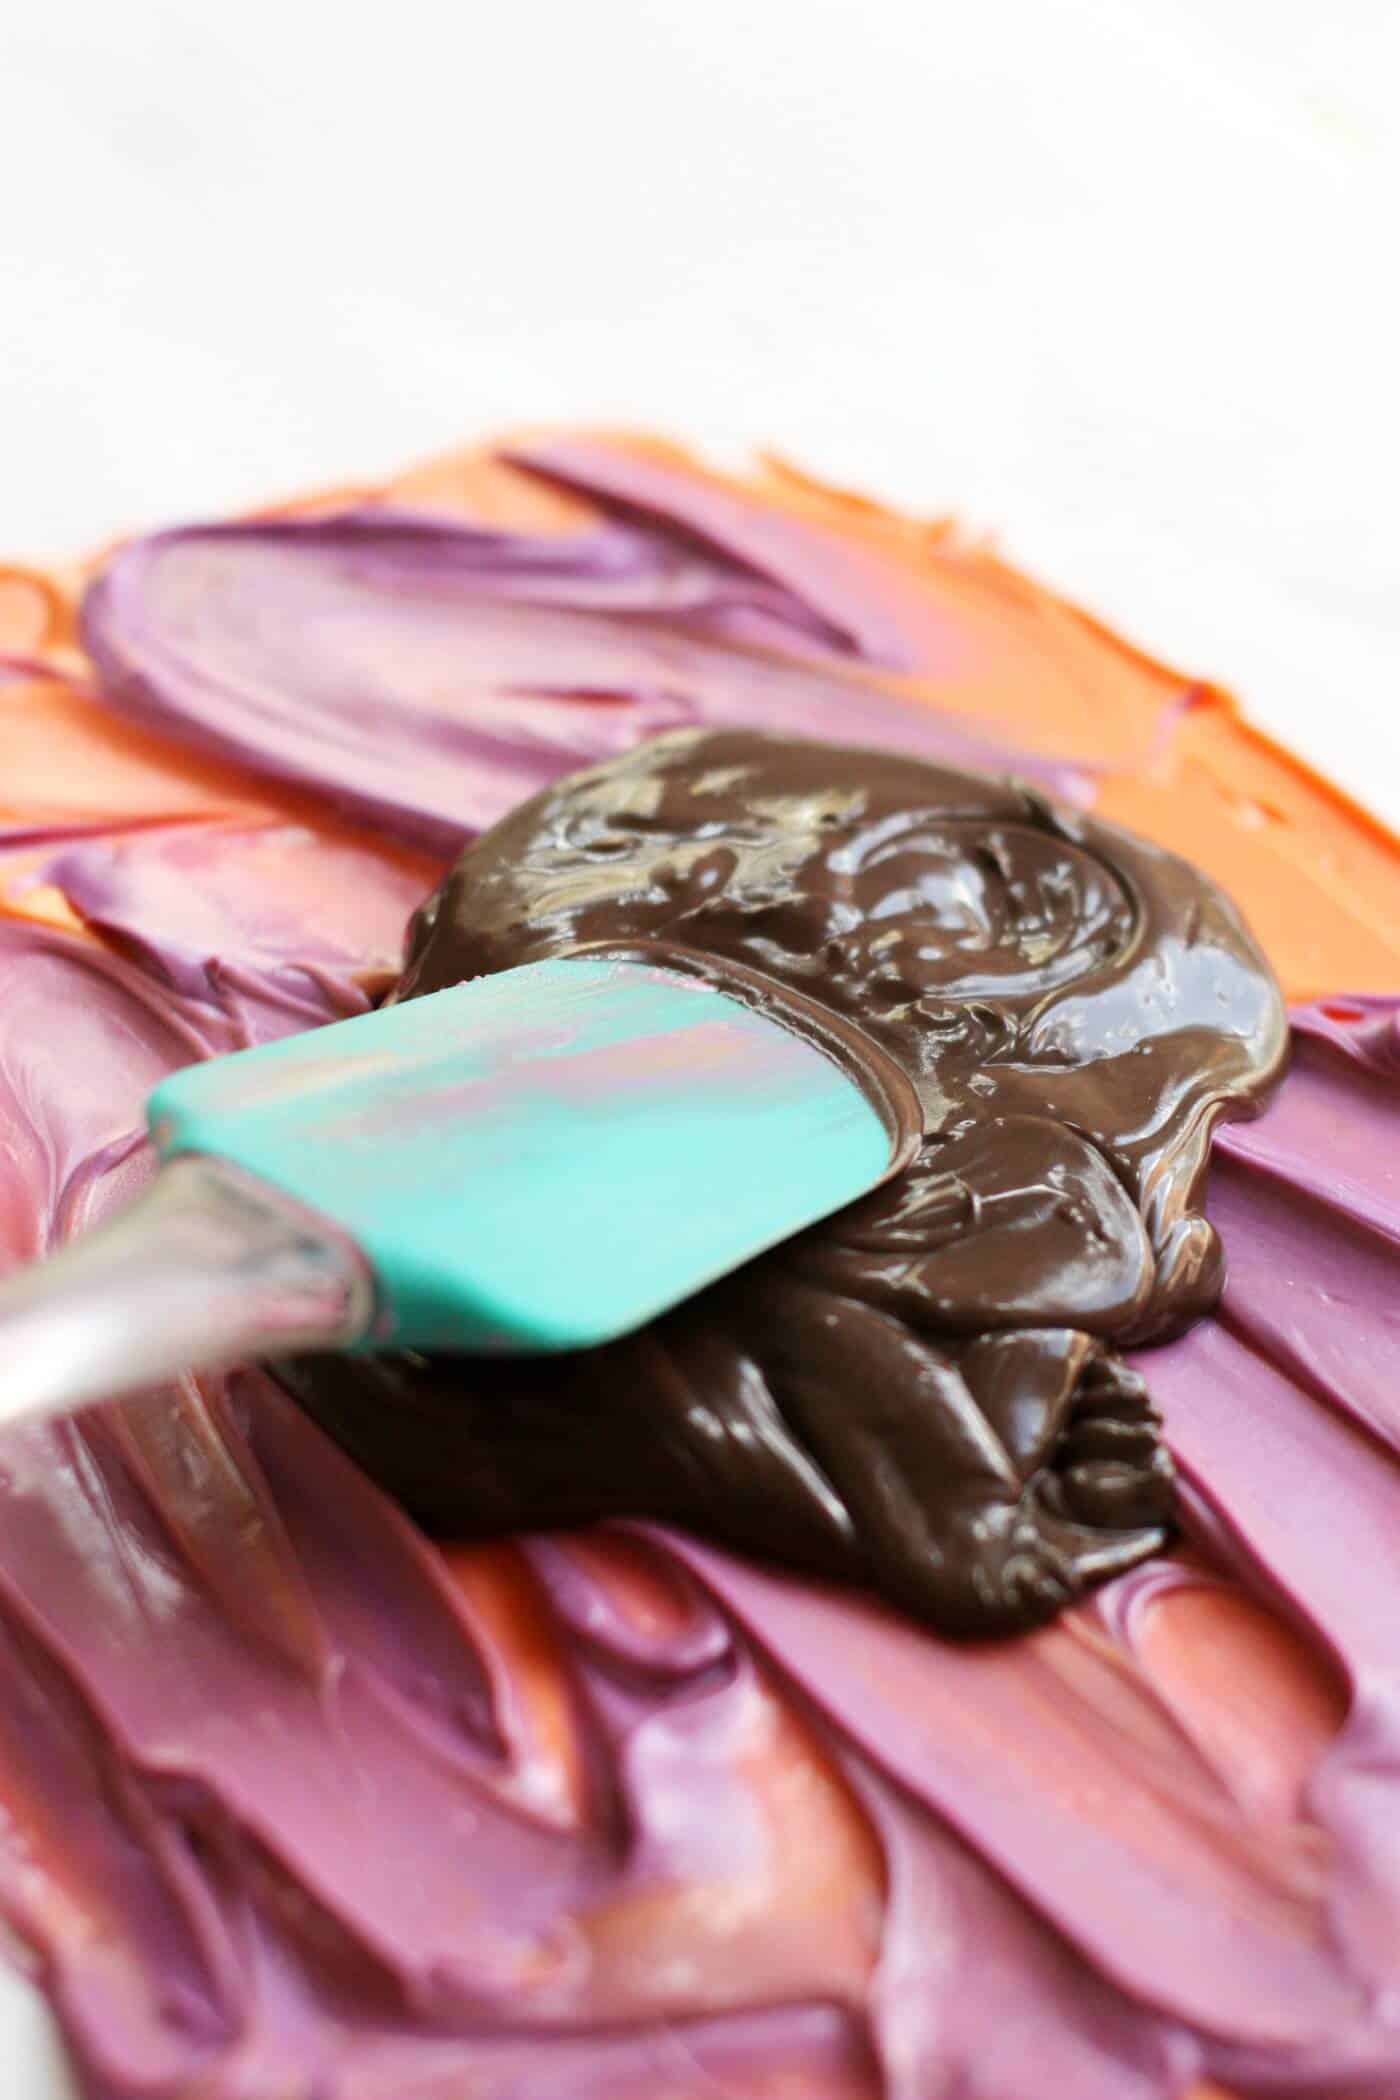 Halloween candy melts smoothing with a spatula